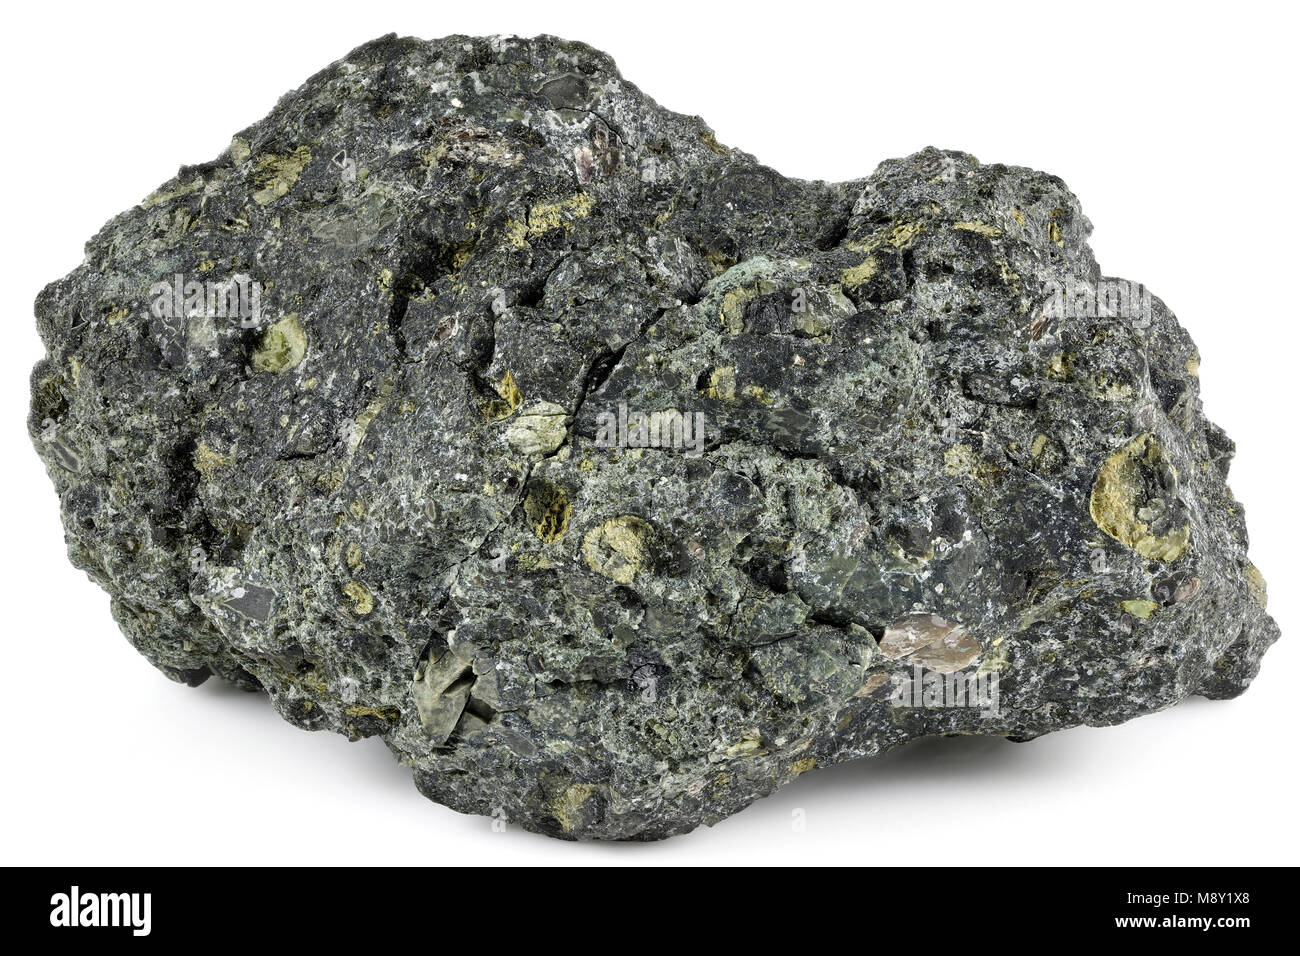 diamond bearing natural rough Kimberlite from South Africa isolated on white background Stock Photo